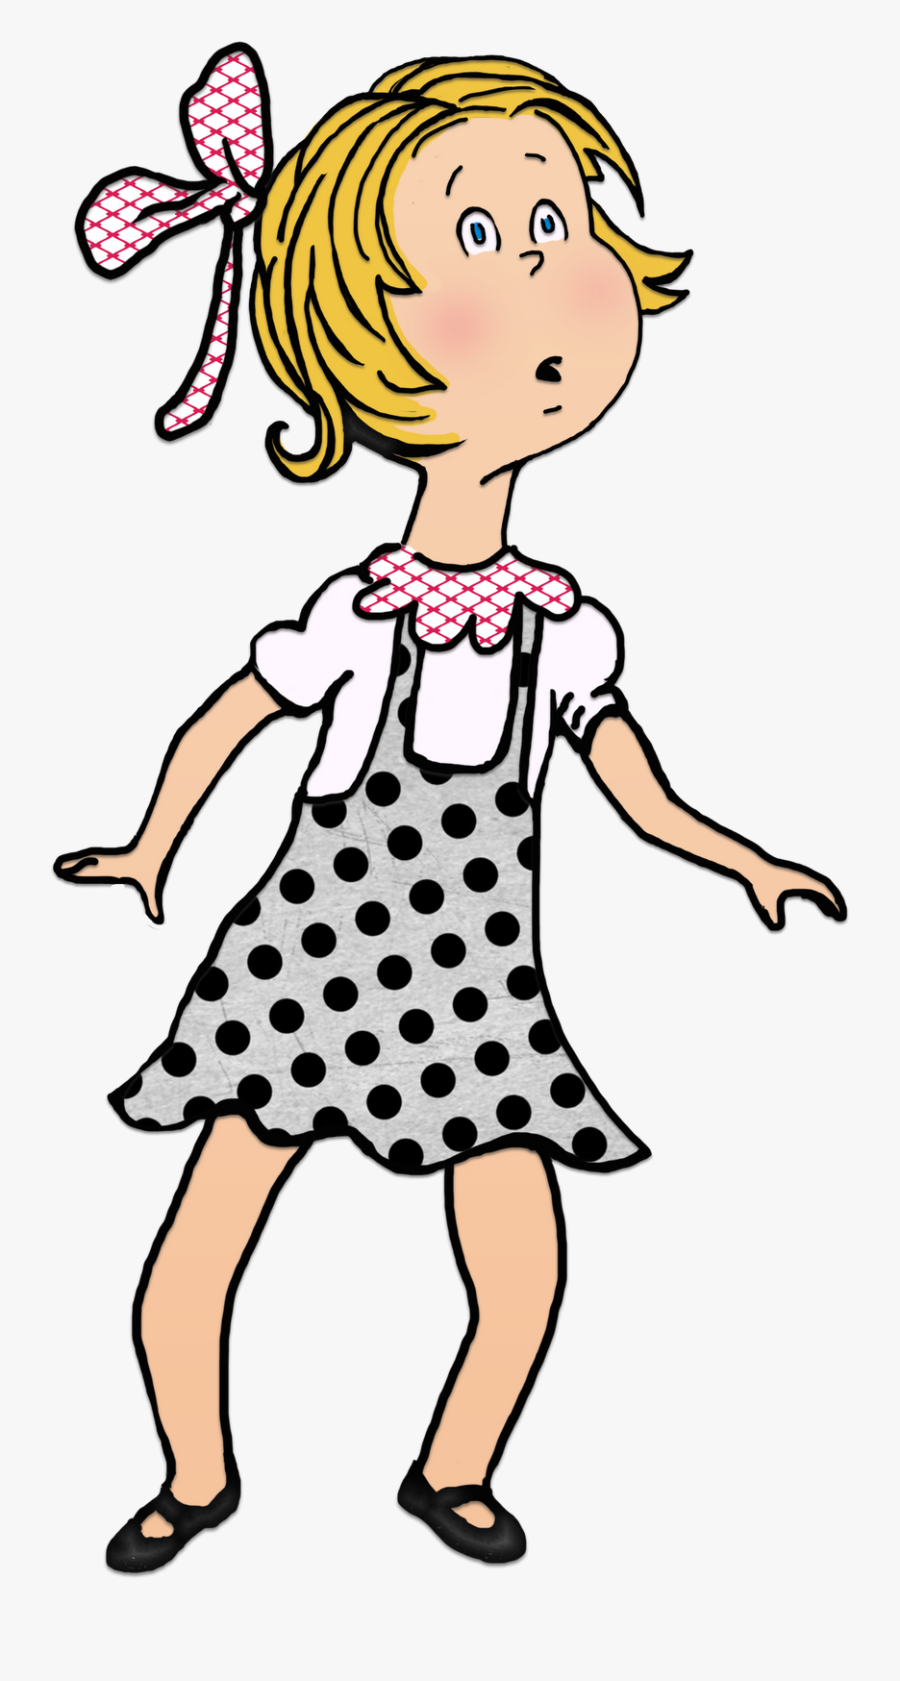 The Cat In The Hat Characters Sally Download - Sally Cat In The Hat Clipart, Transparent Clipart